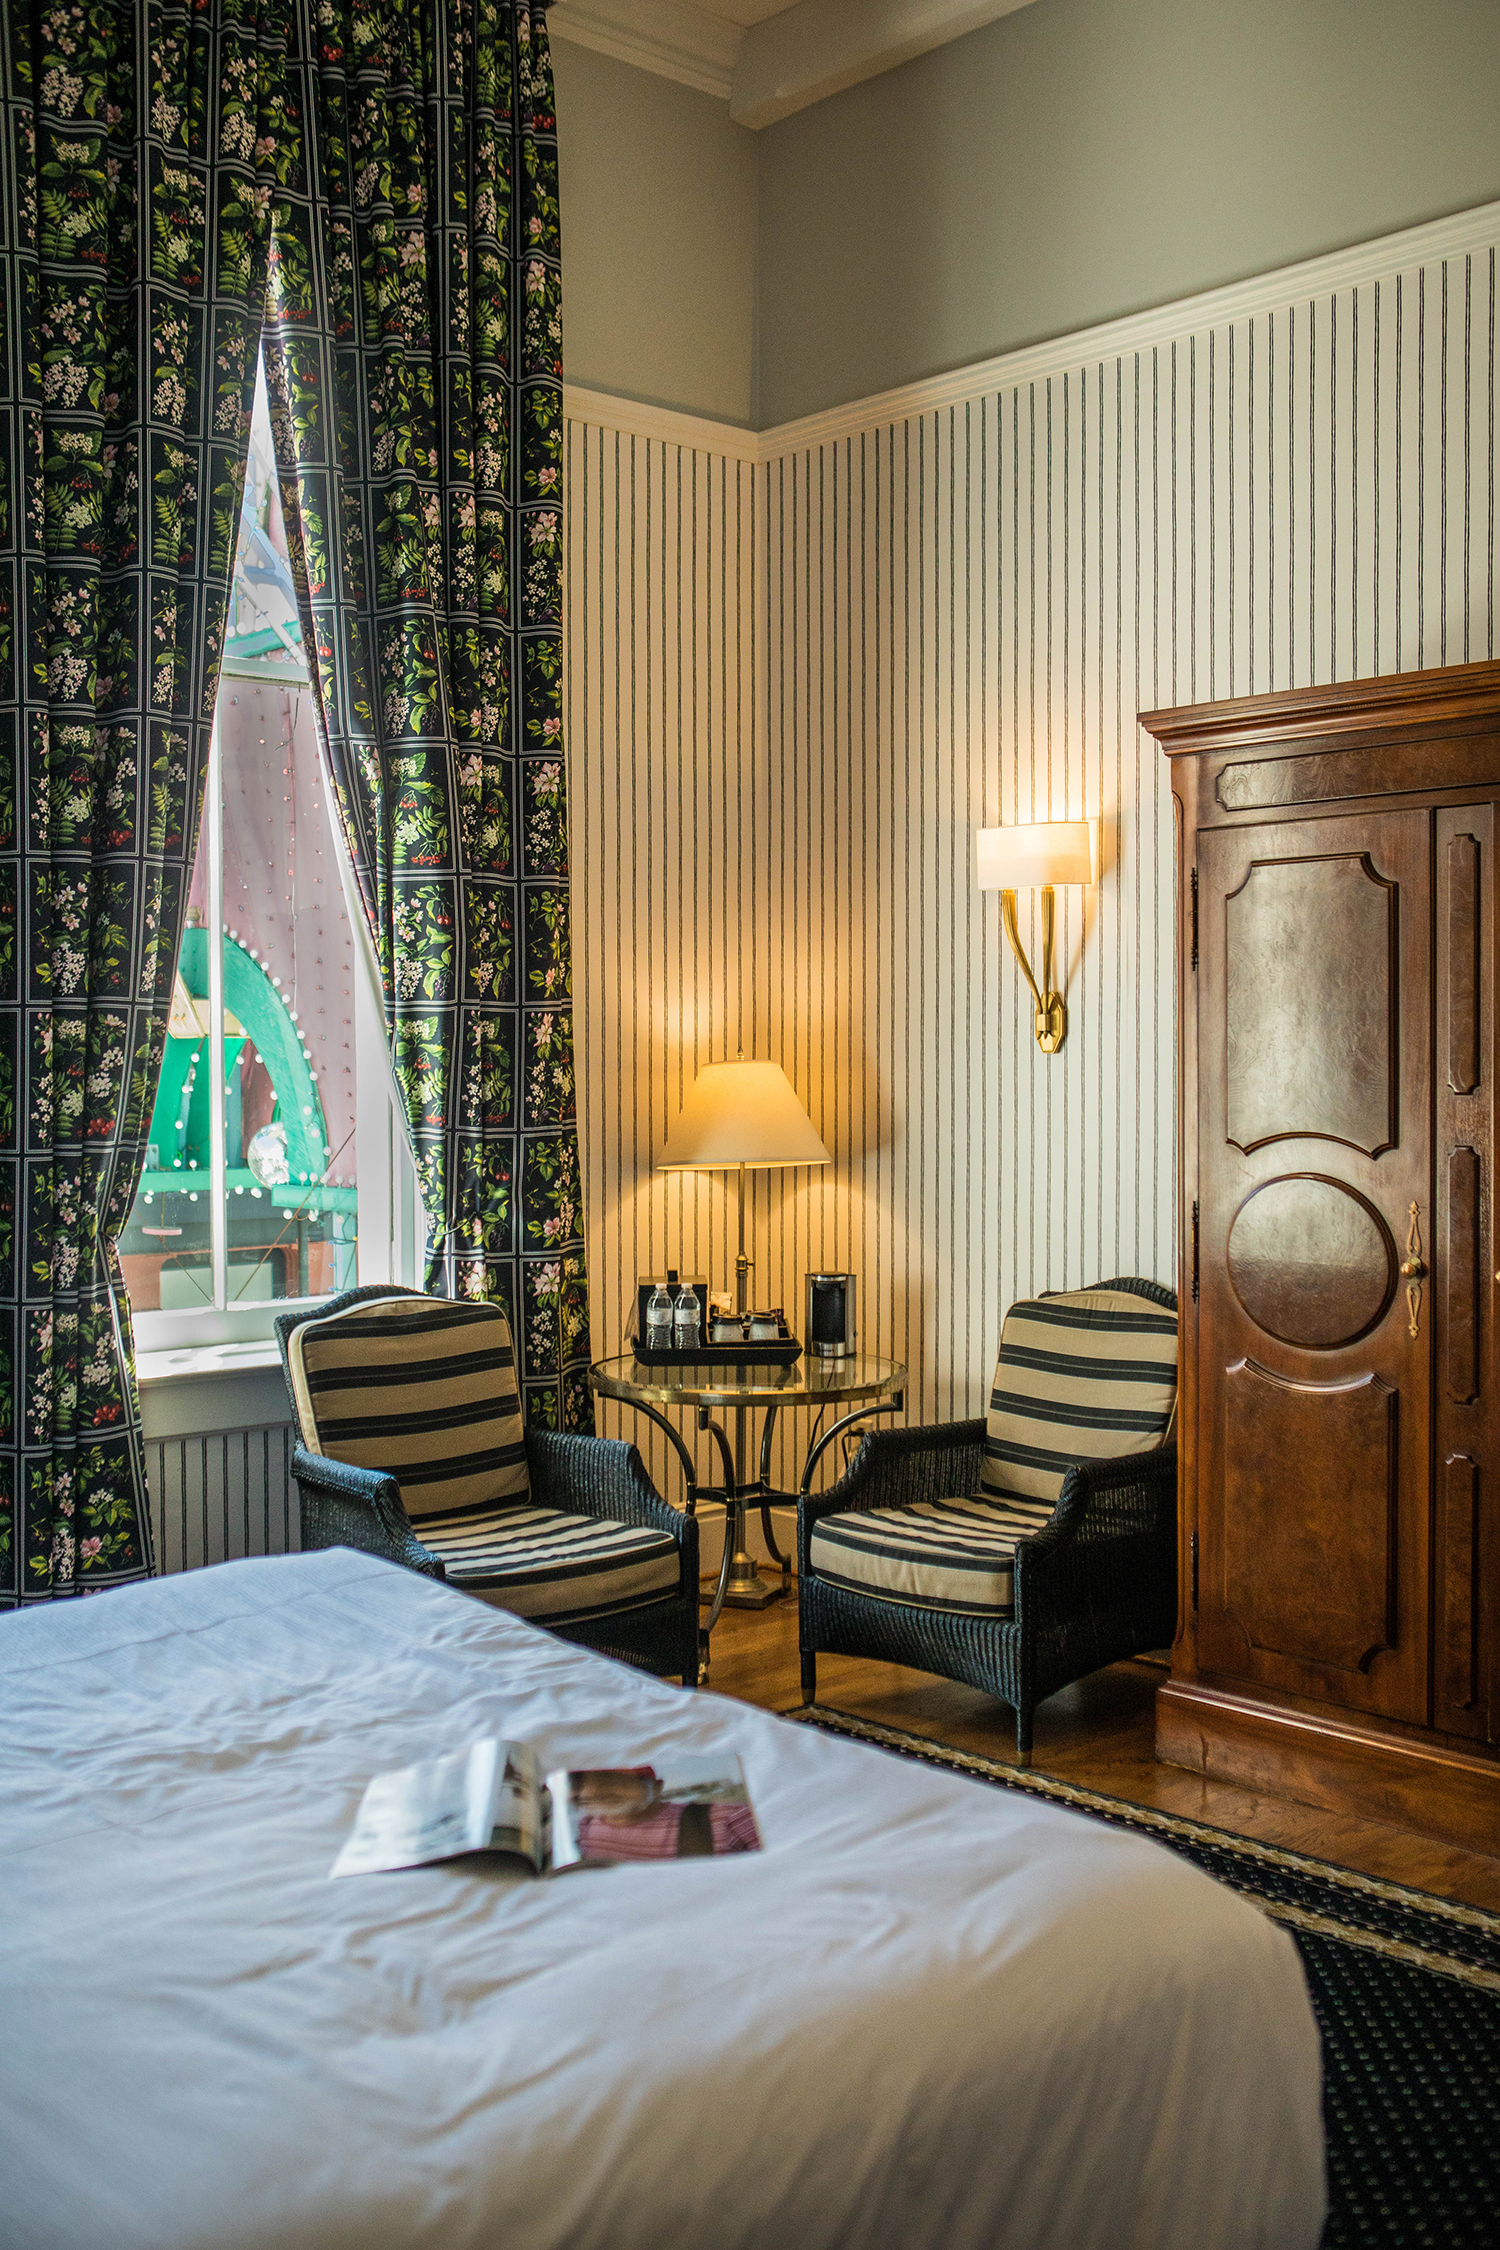 Guest room at the Tremont House